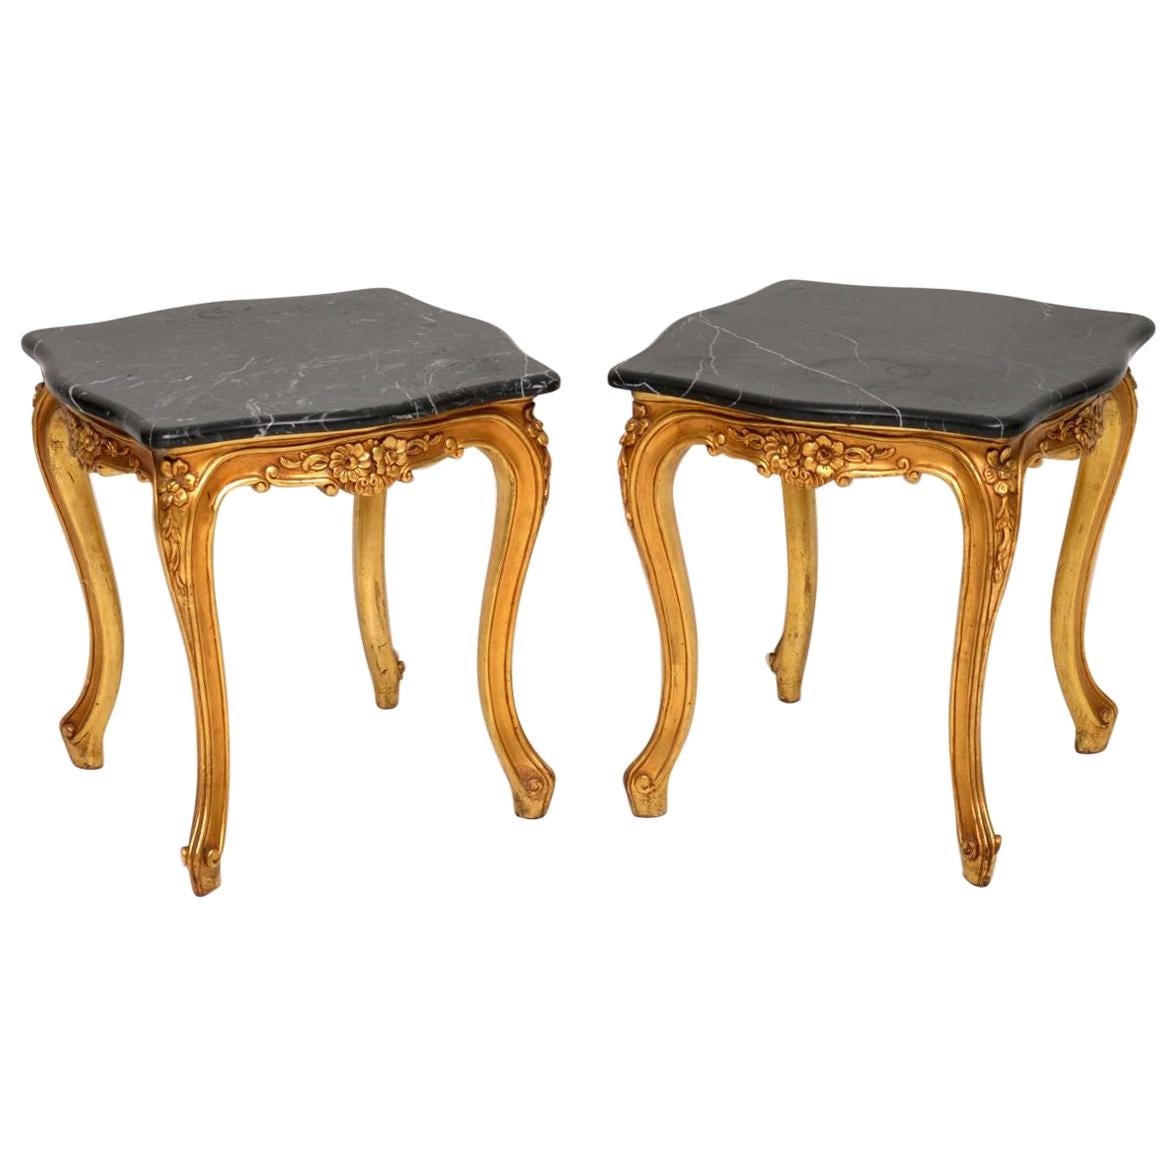 Pair of Antique French Giltwood Marble-Top Side Tables